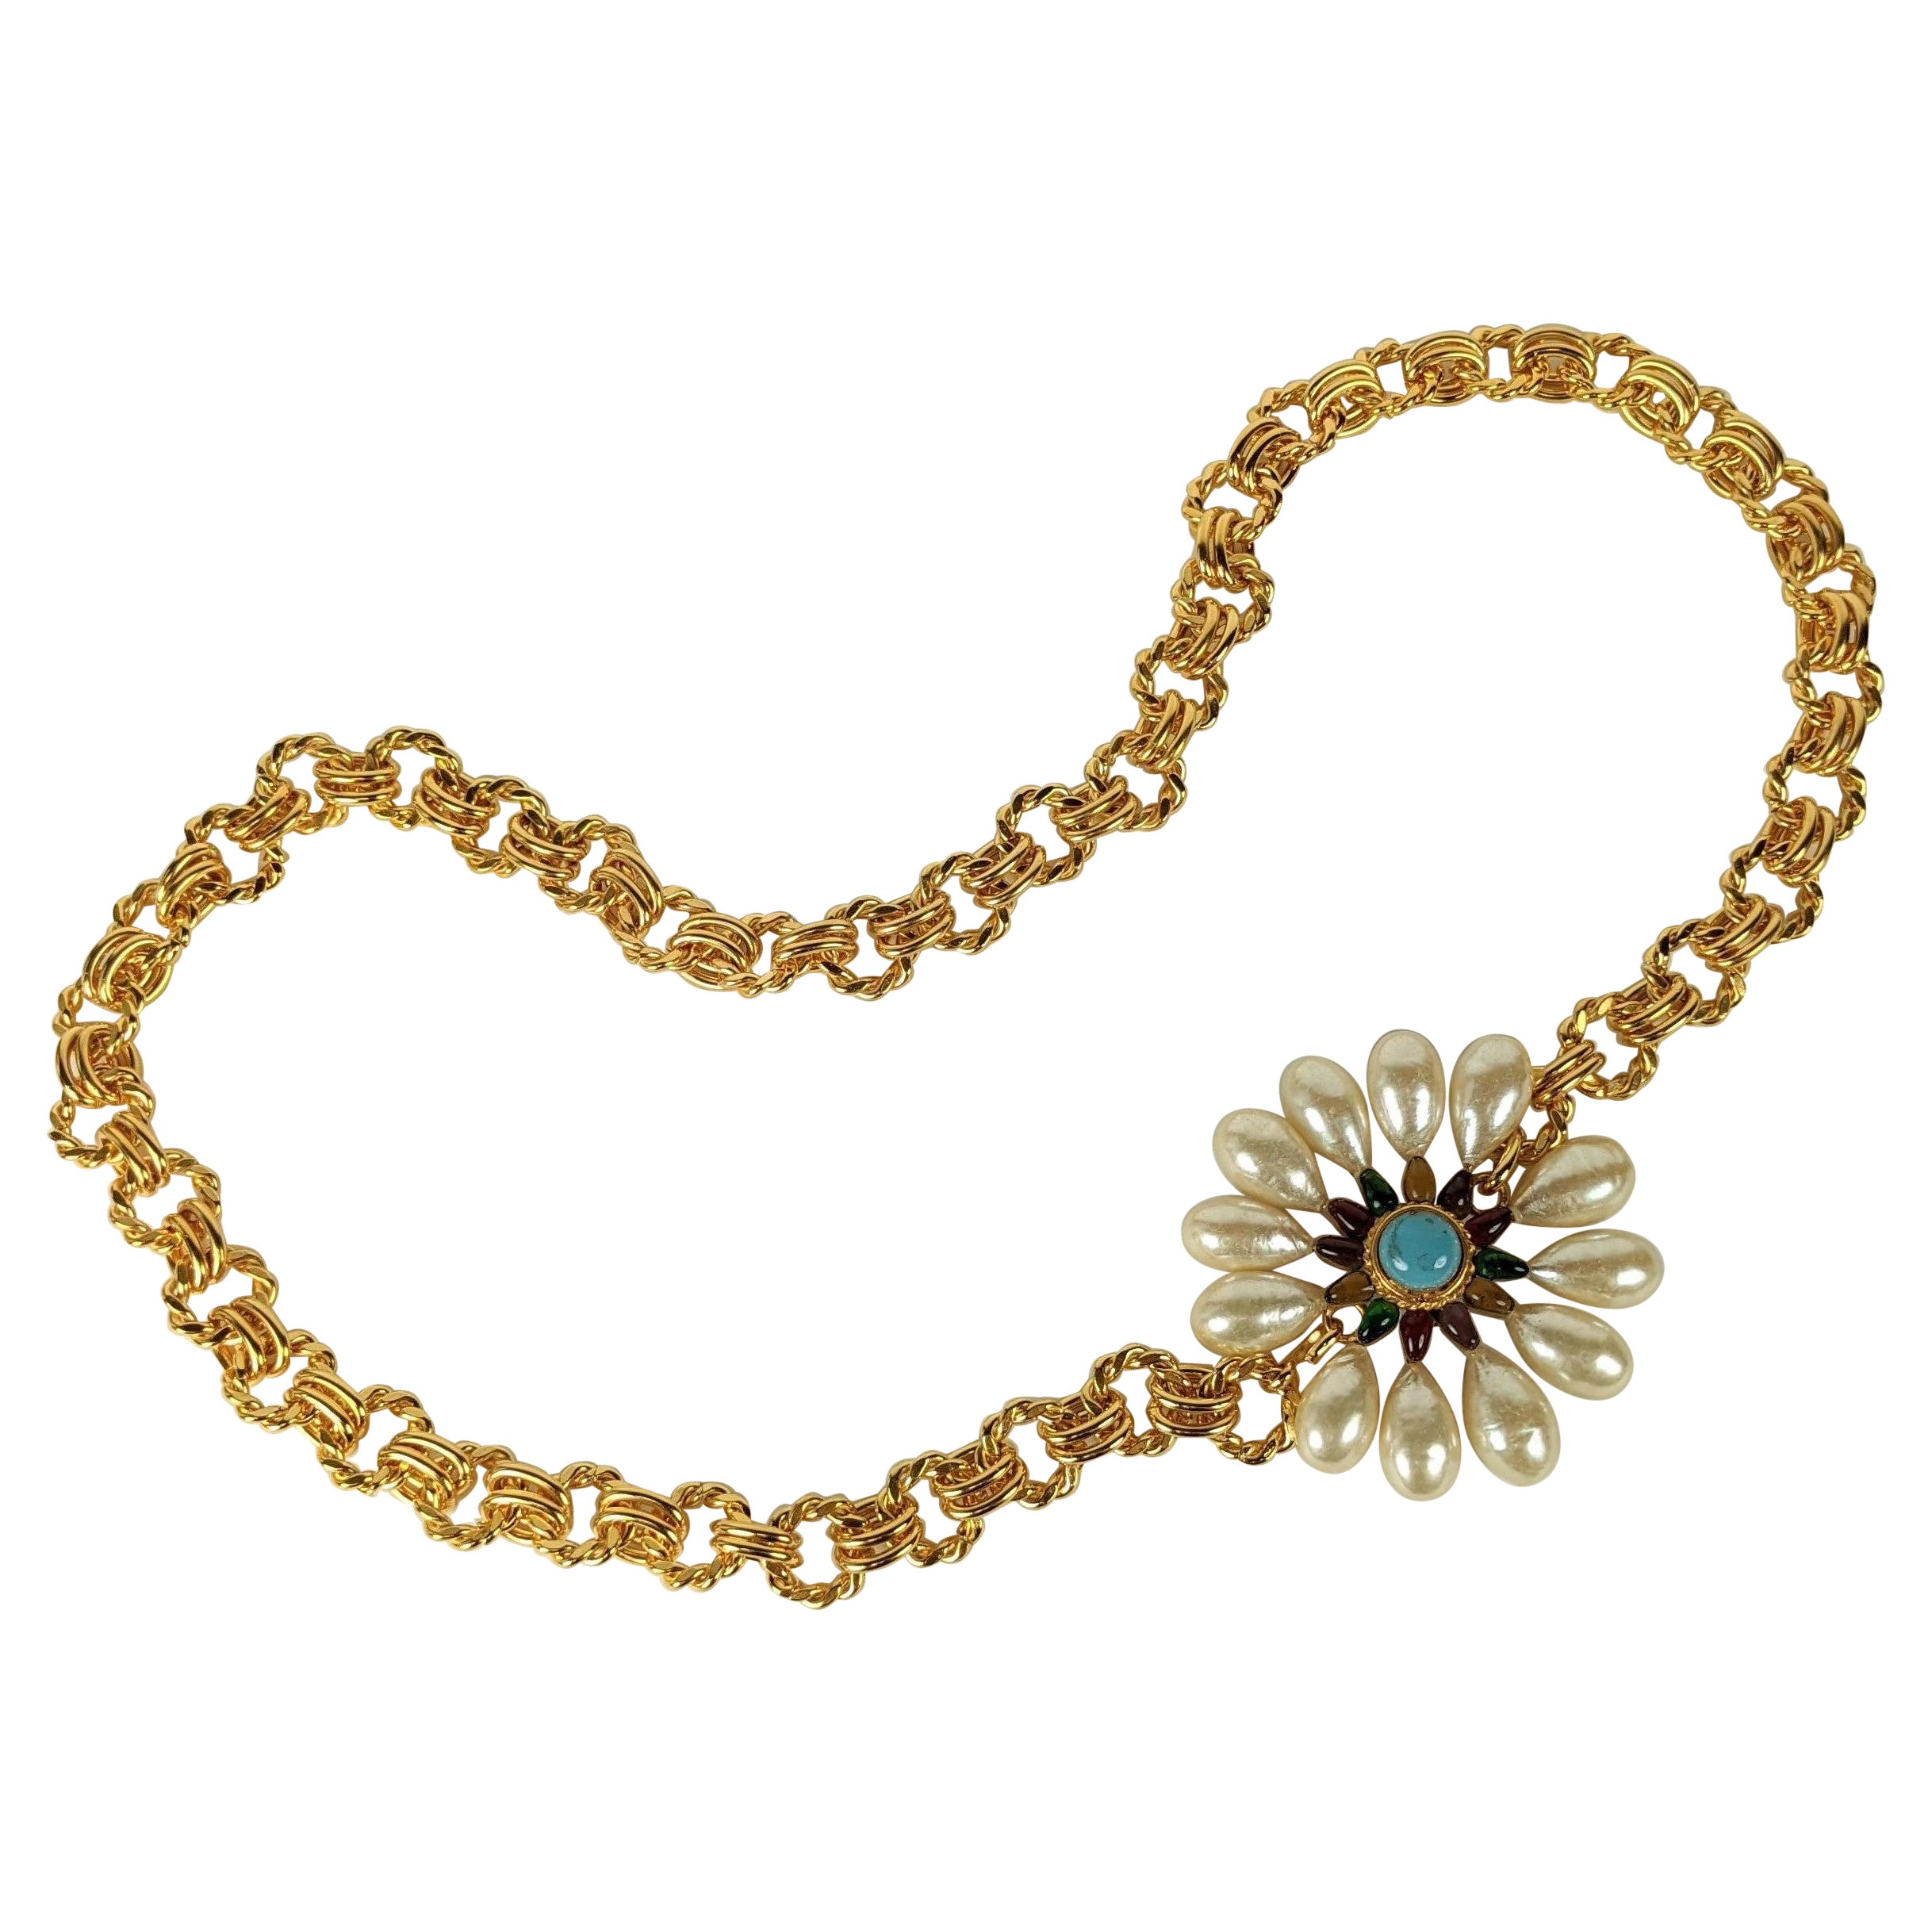 Maison Gripoix for Chanel Baroque Pearl Flowerhead Chain Necklace